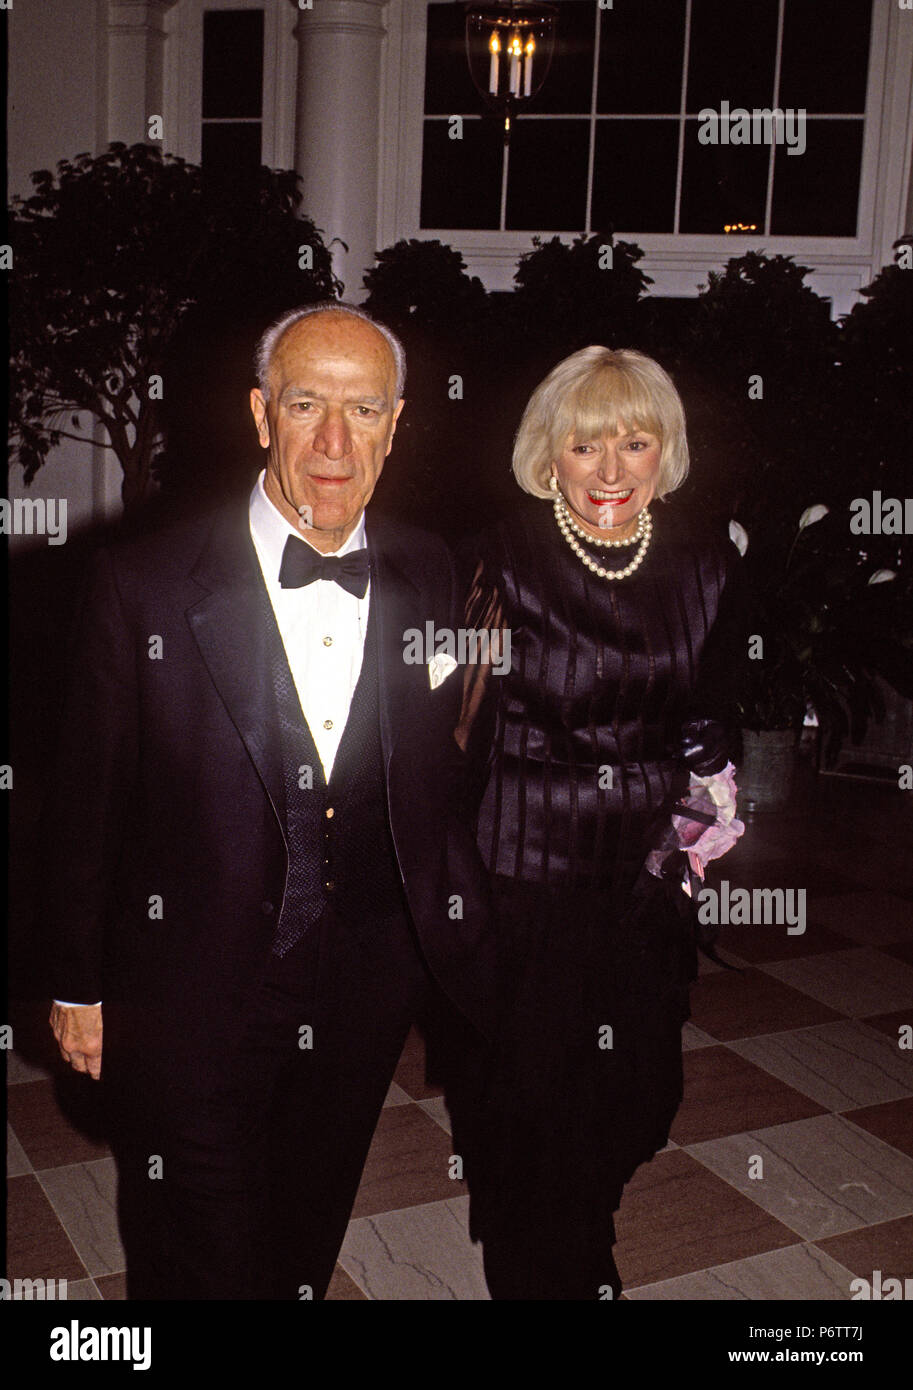 Washington, DC., USA, February 20, 1991 Robert Mondavi with his wife Margit Biever Mondavi arrive in the book sellers lobby of the White House to attend the state dinner in honor of Queen Margrethe II of Denmark Credit: Marc Reinstein / MediaPunch Stock Photo